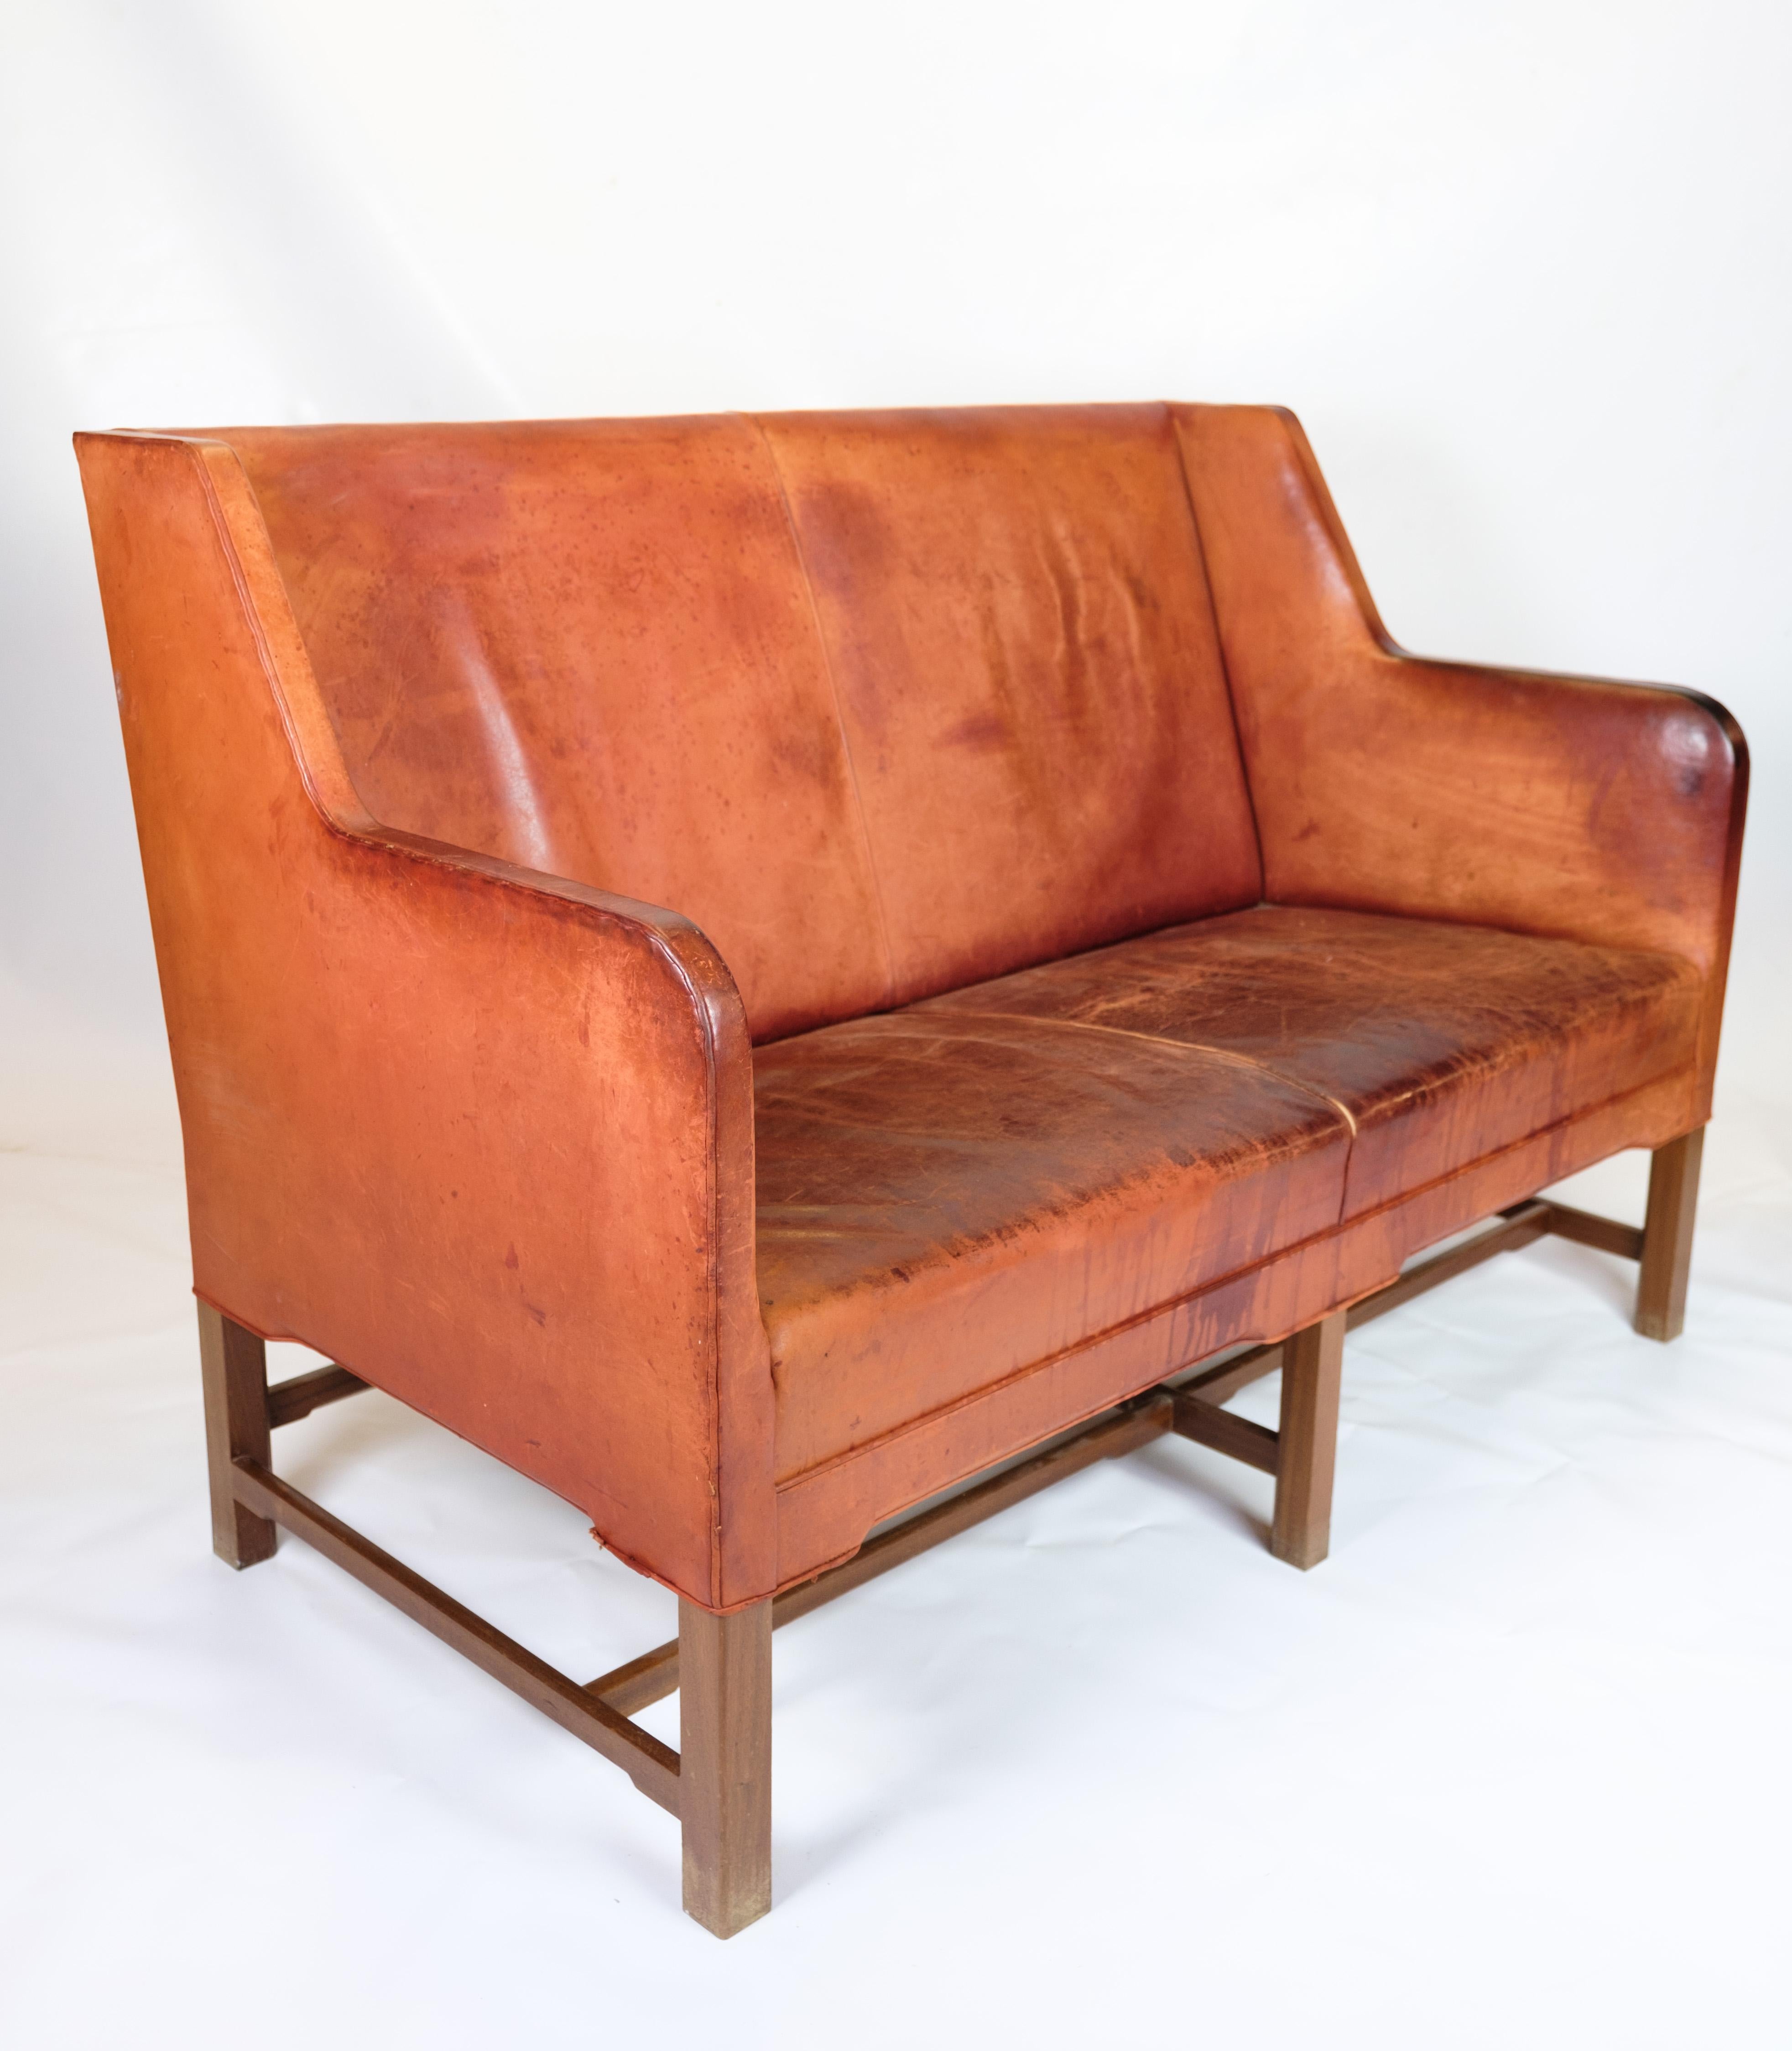 Leather Vintage two-seater Sofa by Kaare Klint for Rud. Rasmussen 1935s For Sale